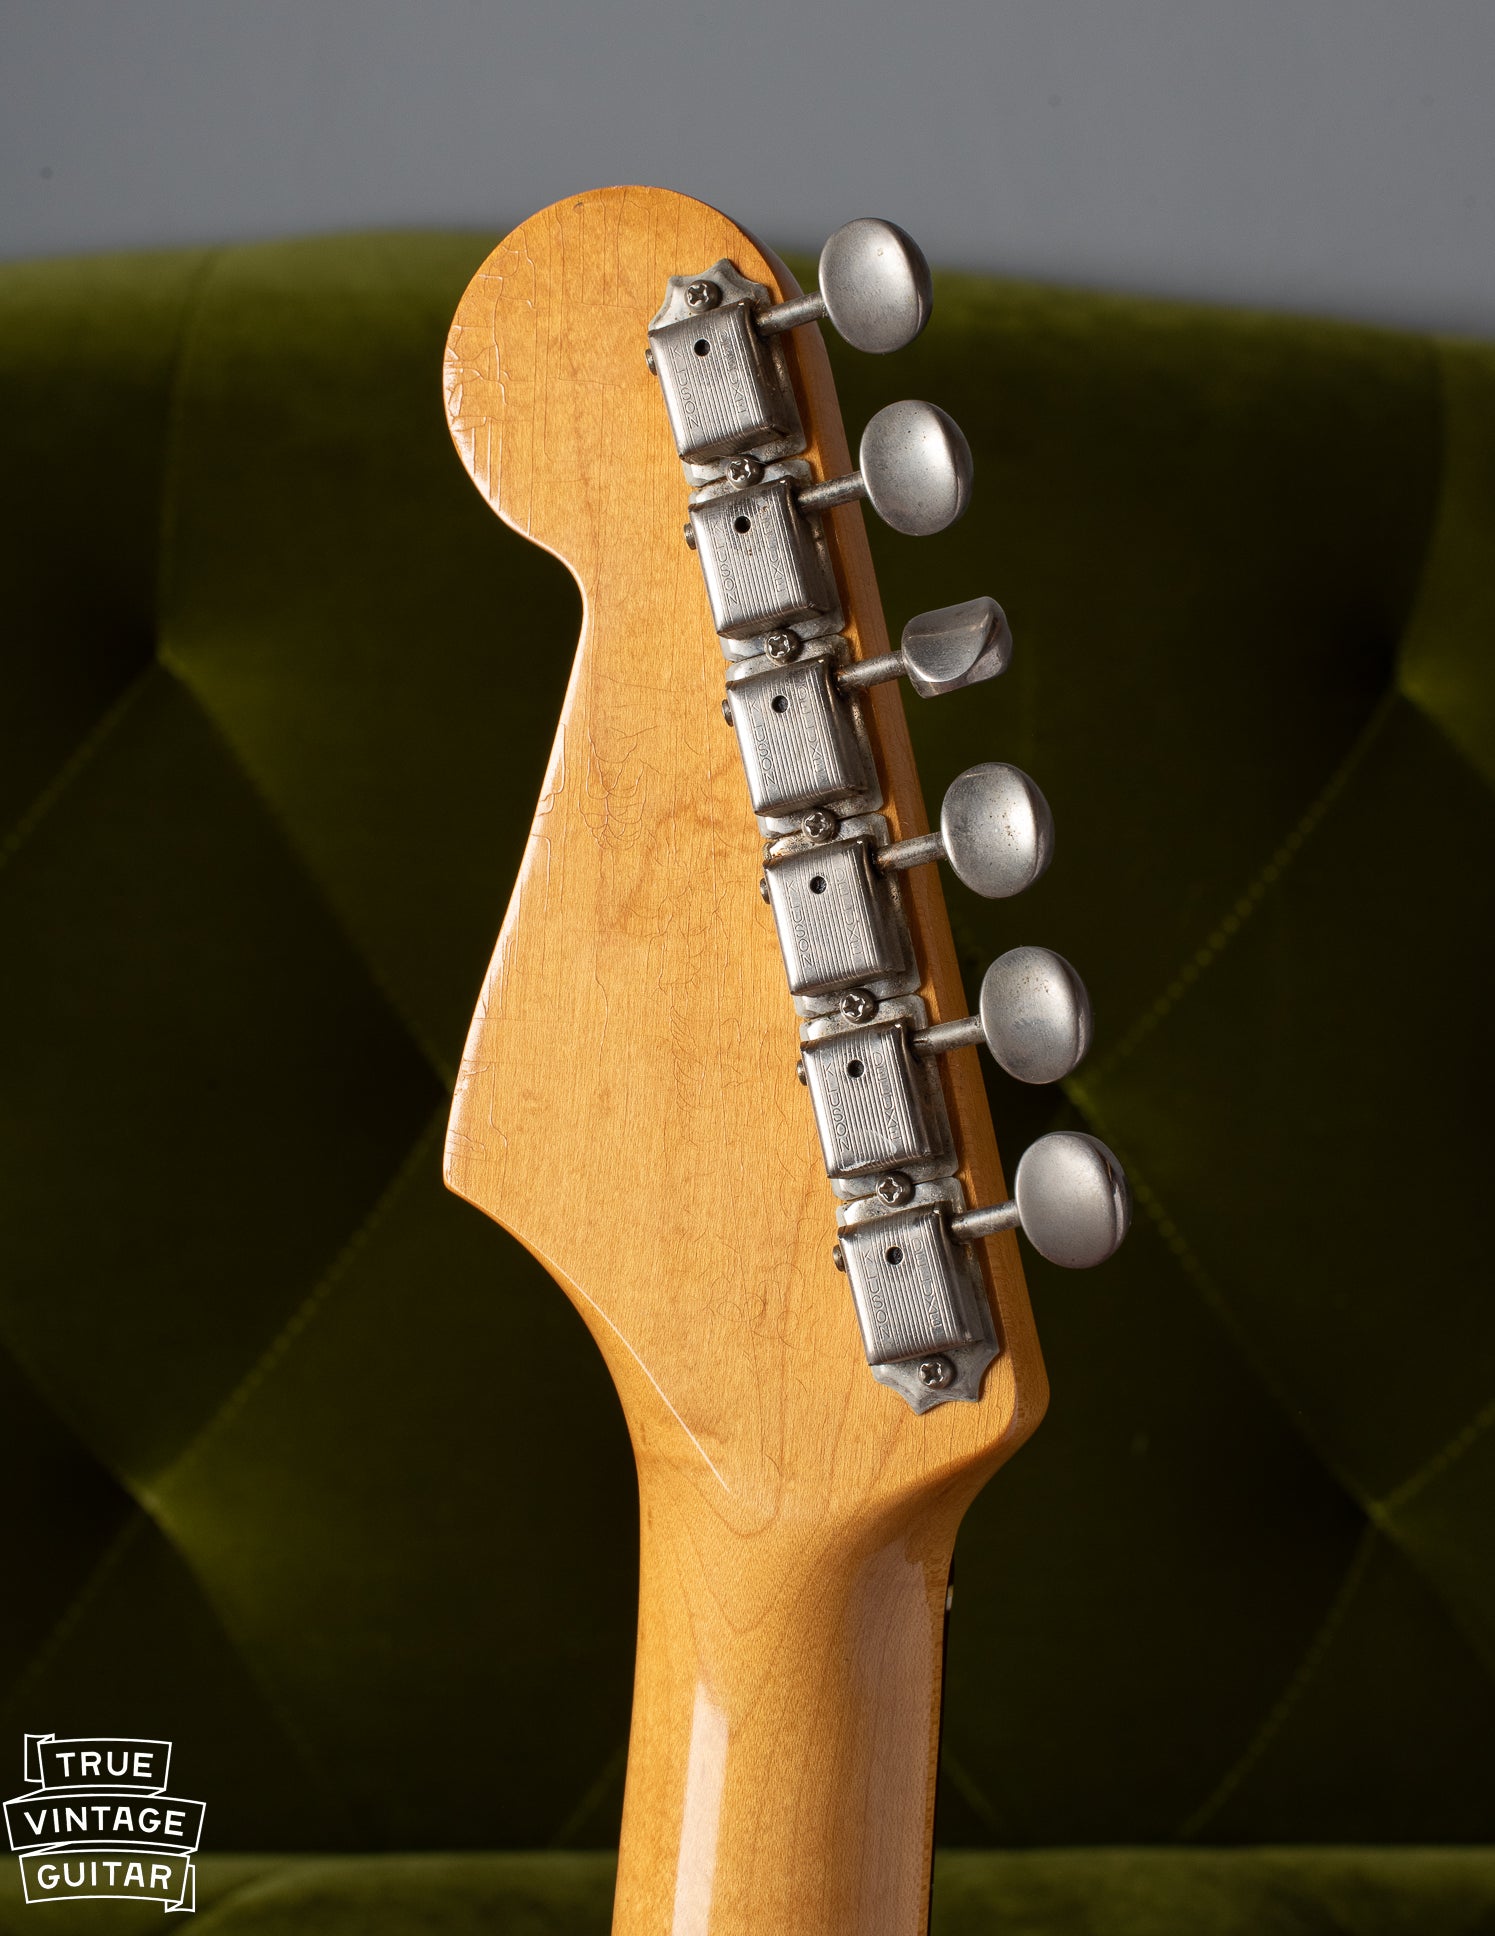 Double line Kluson tuners on neck of 1965 Stratocaster